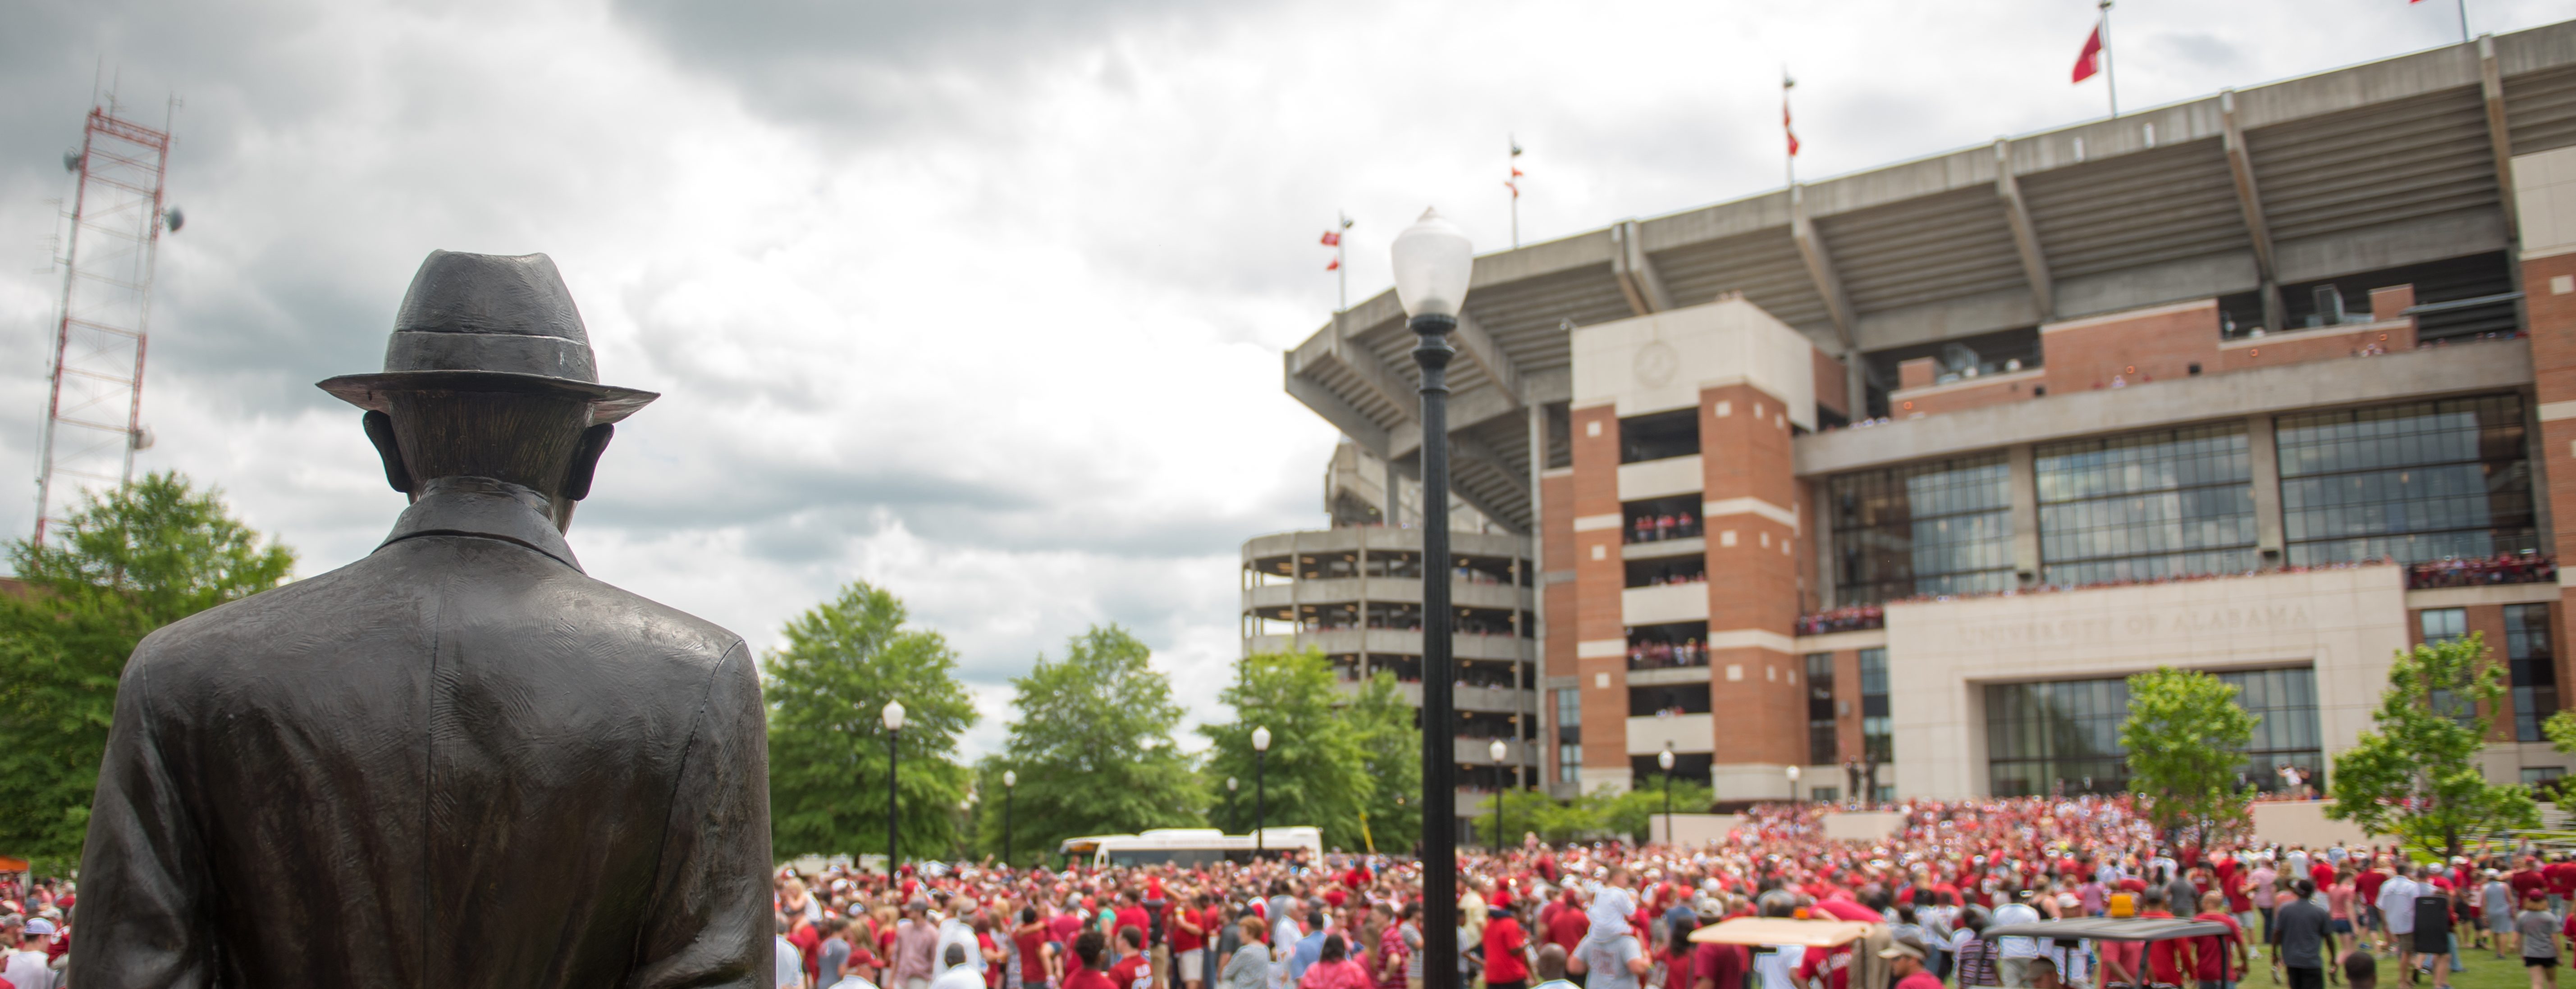 Image of Bryant Denny Stadium with crowd on gameday.